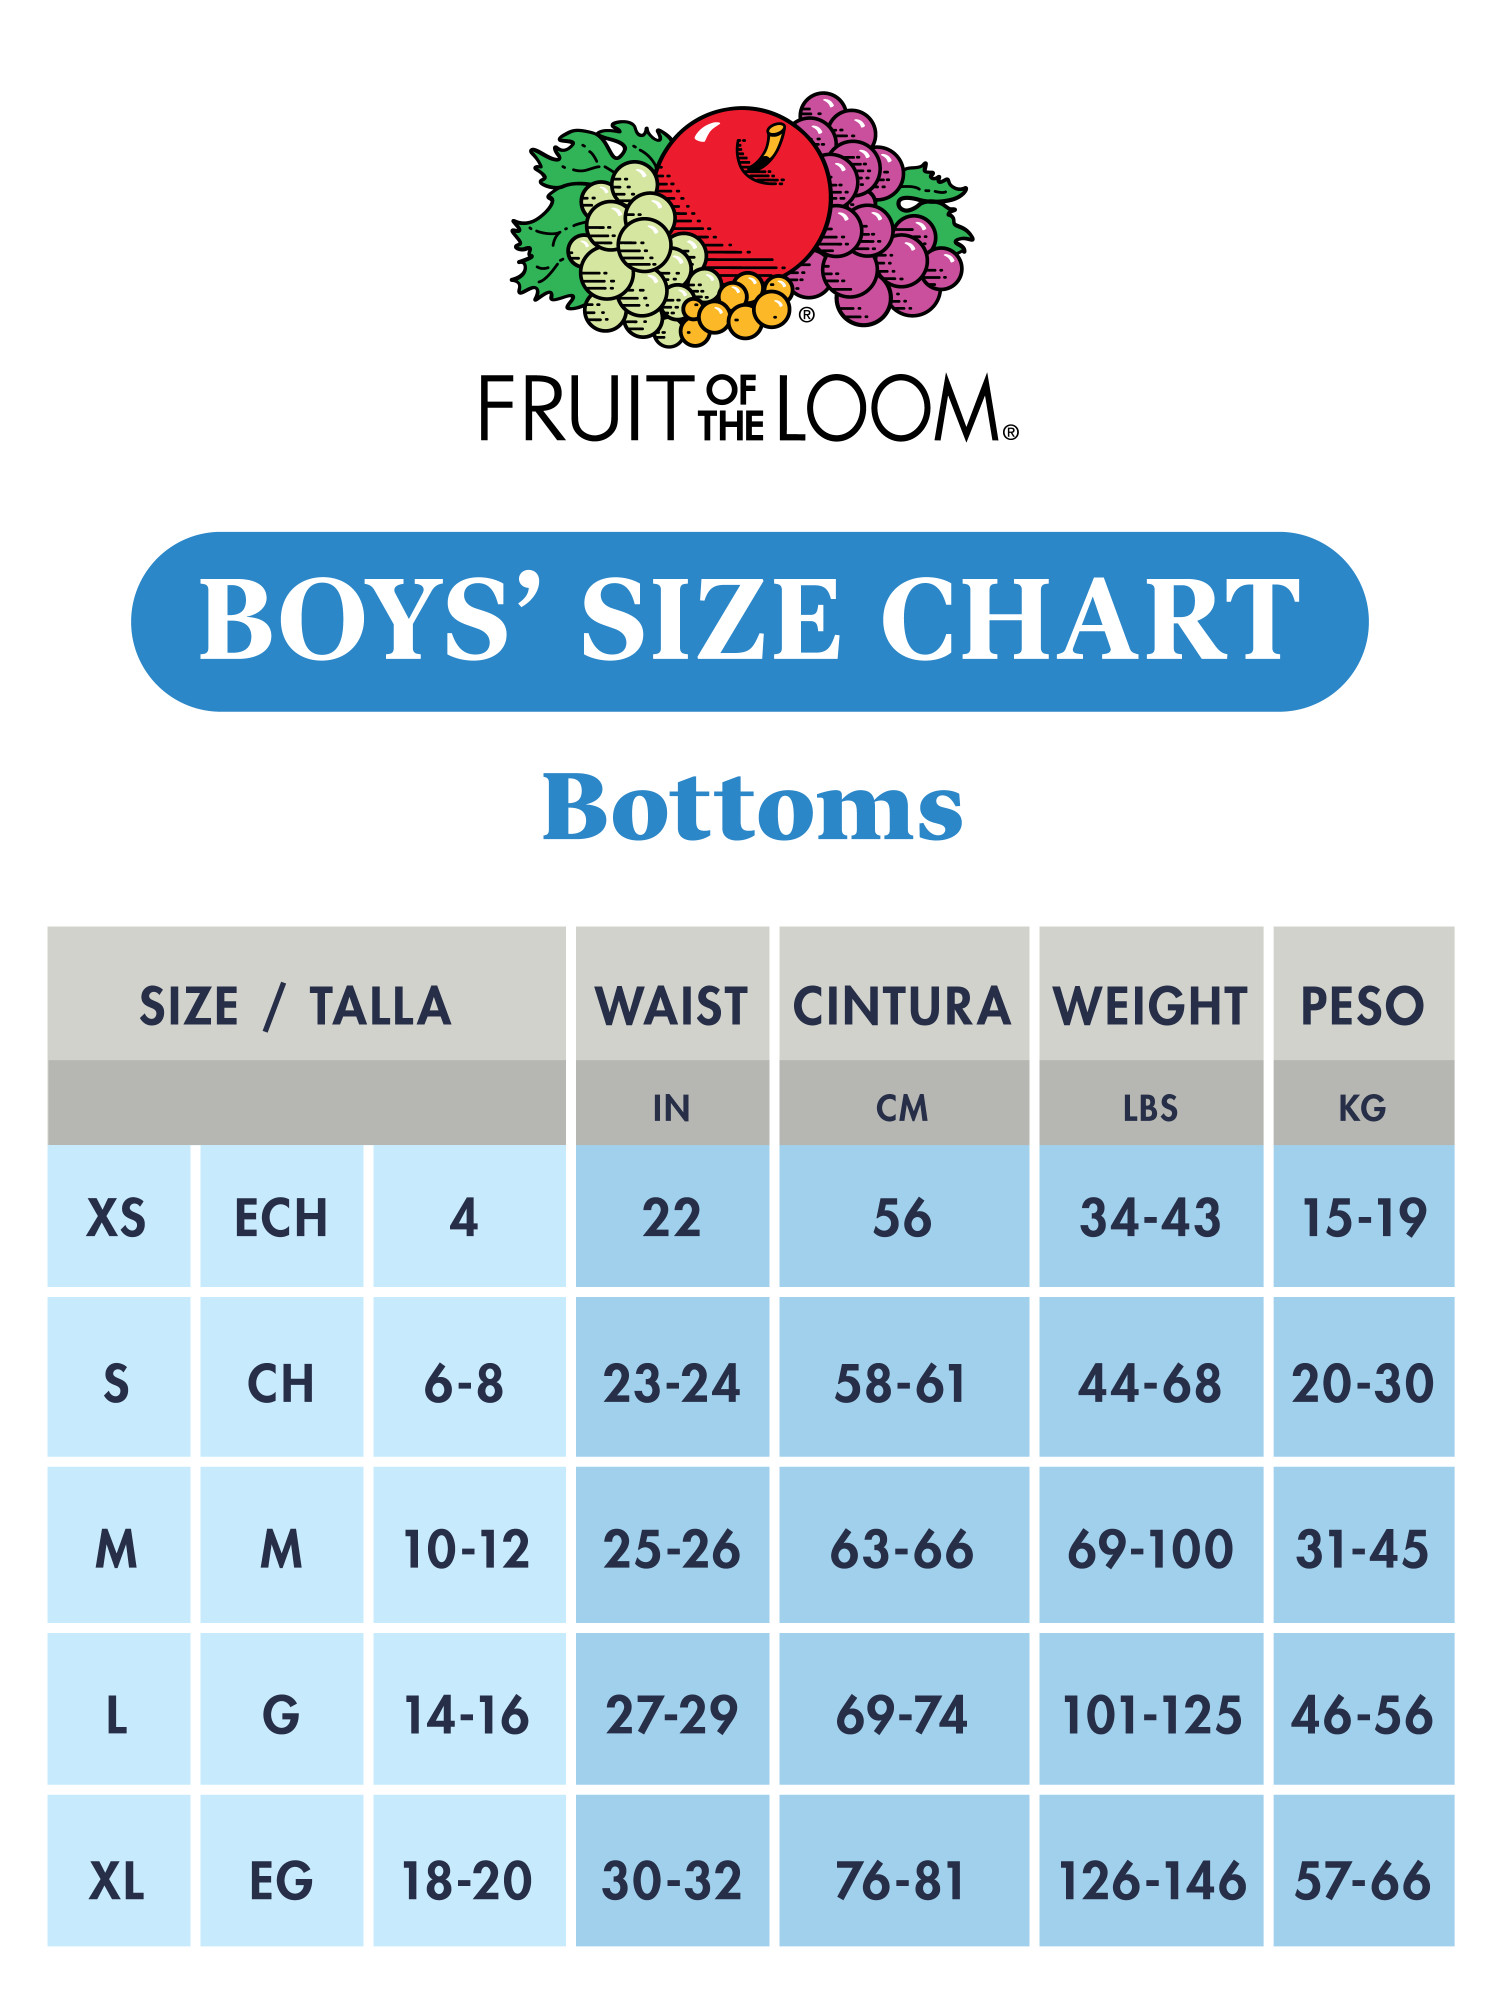 Fruit of the Loom Boys' Cotton Boxer Briefs, 7 Pack - image 4 of 6